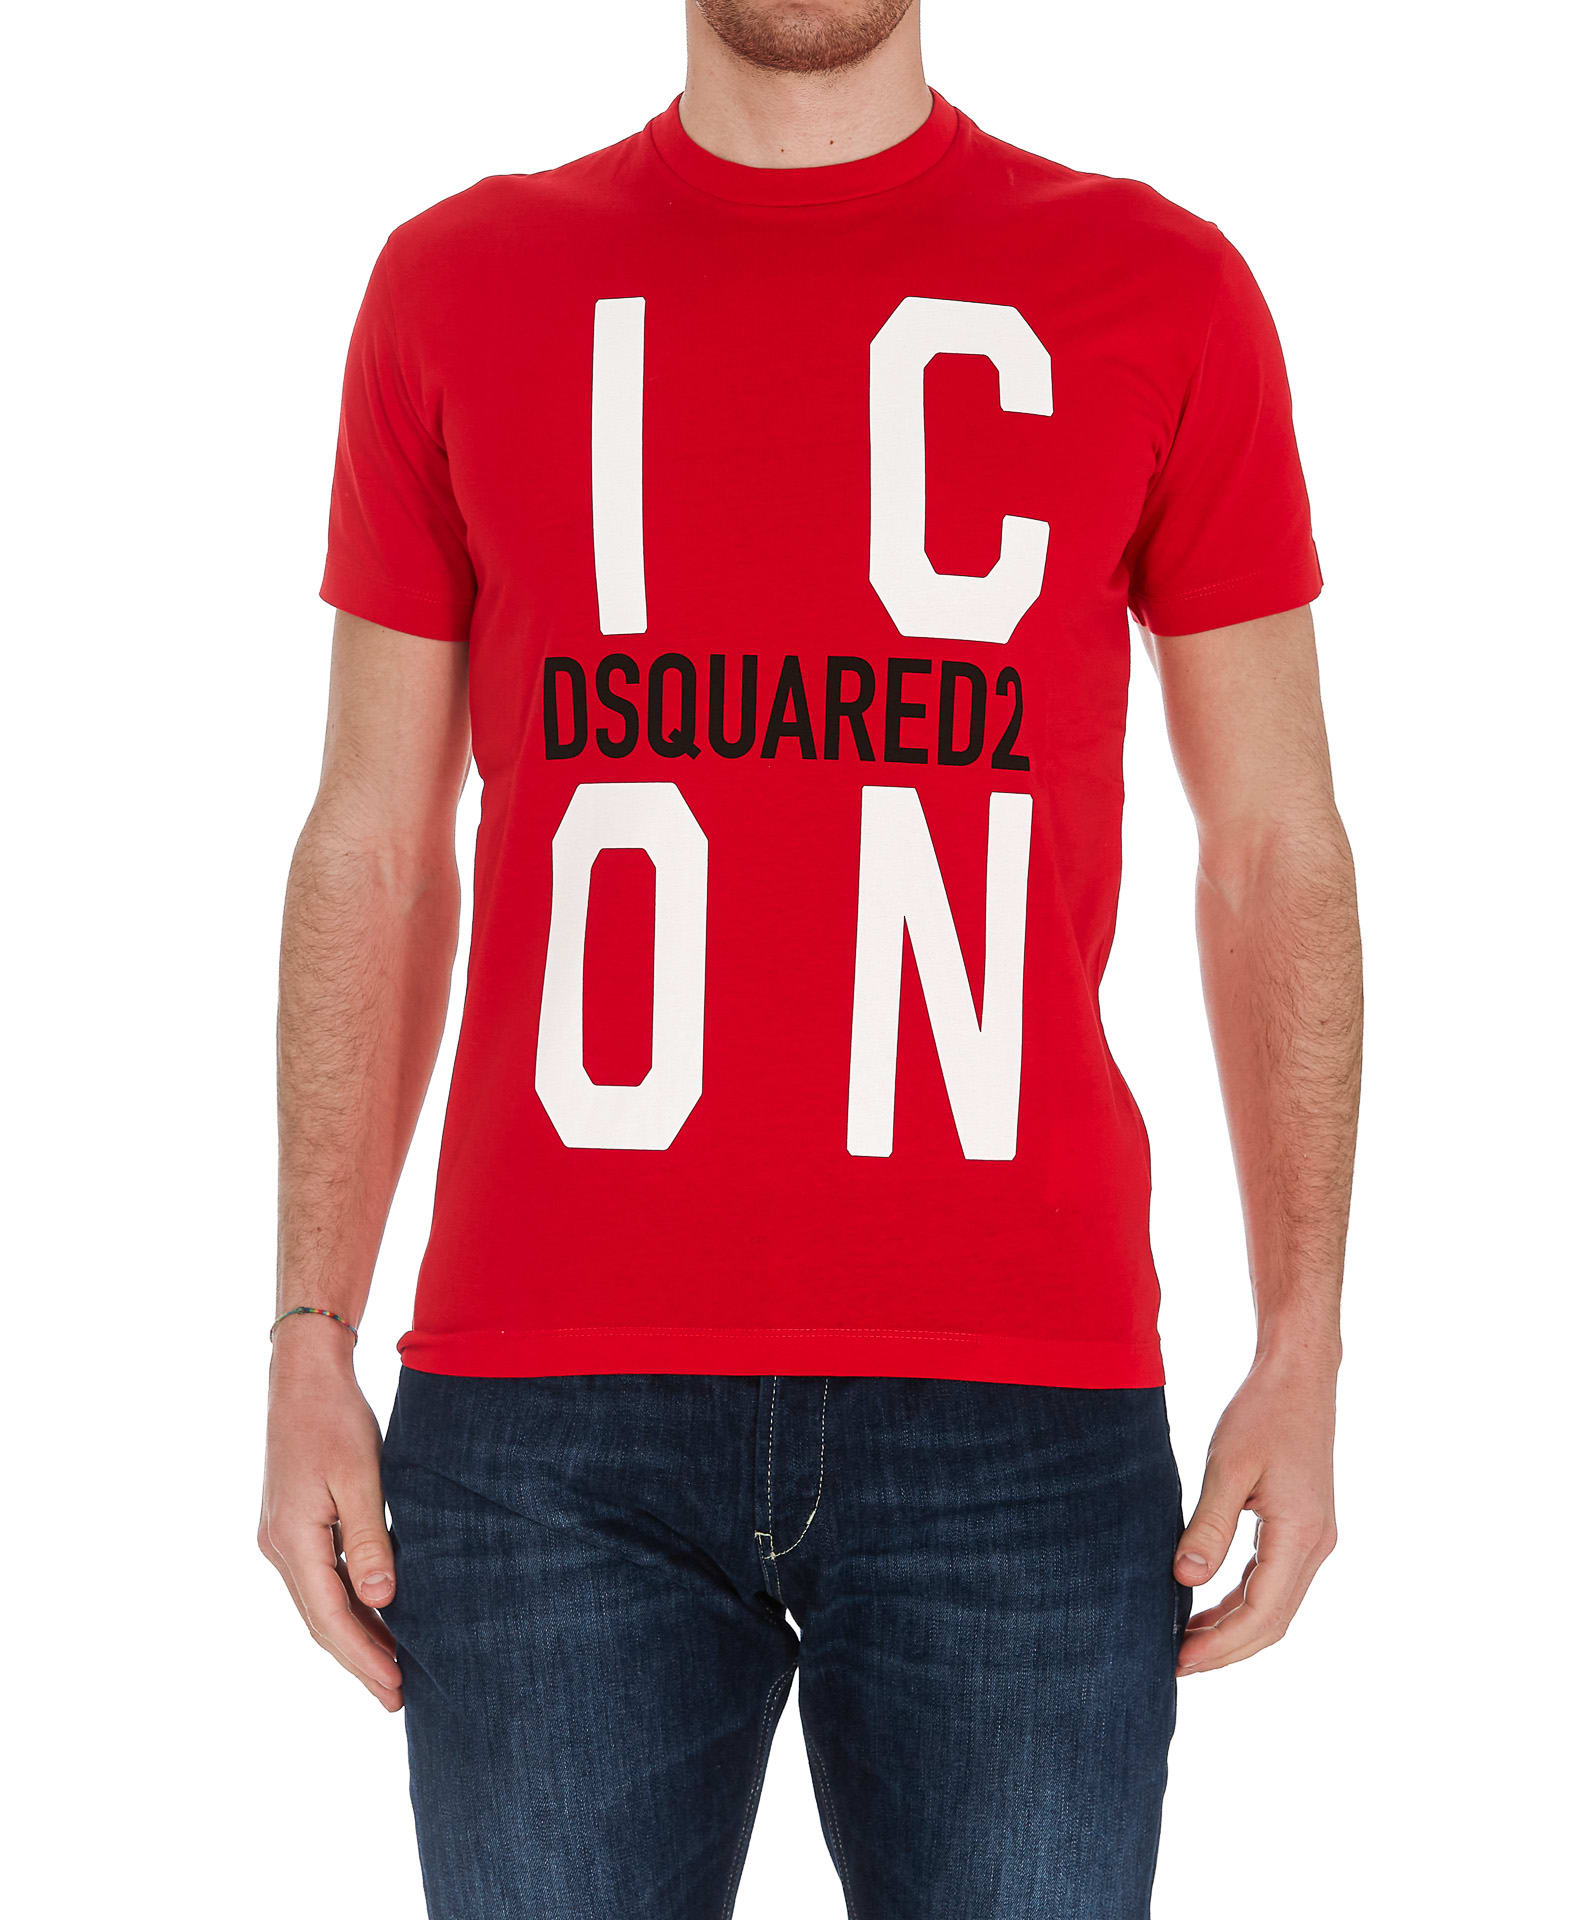 DSQUARED2 ICON T-SHIRT,11898409